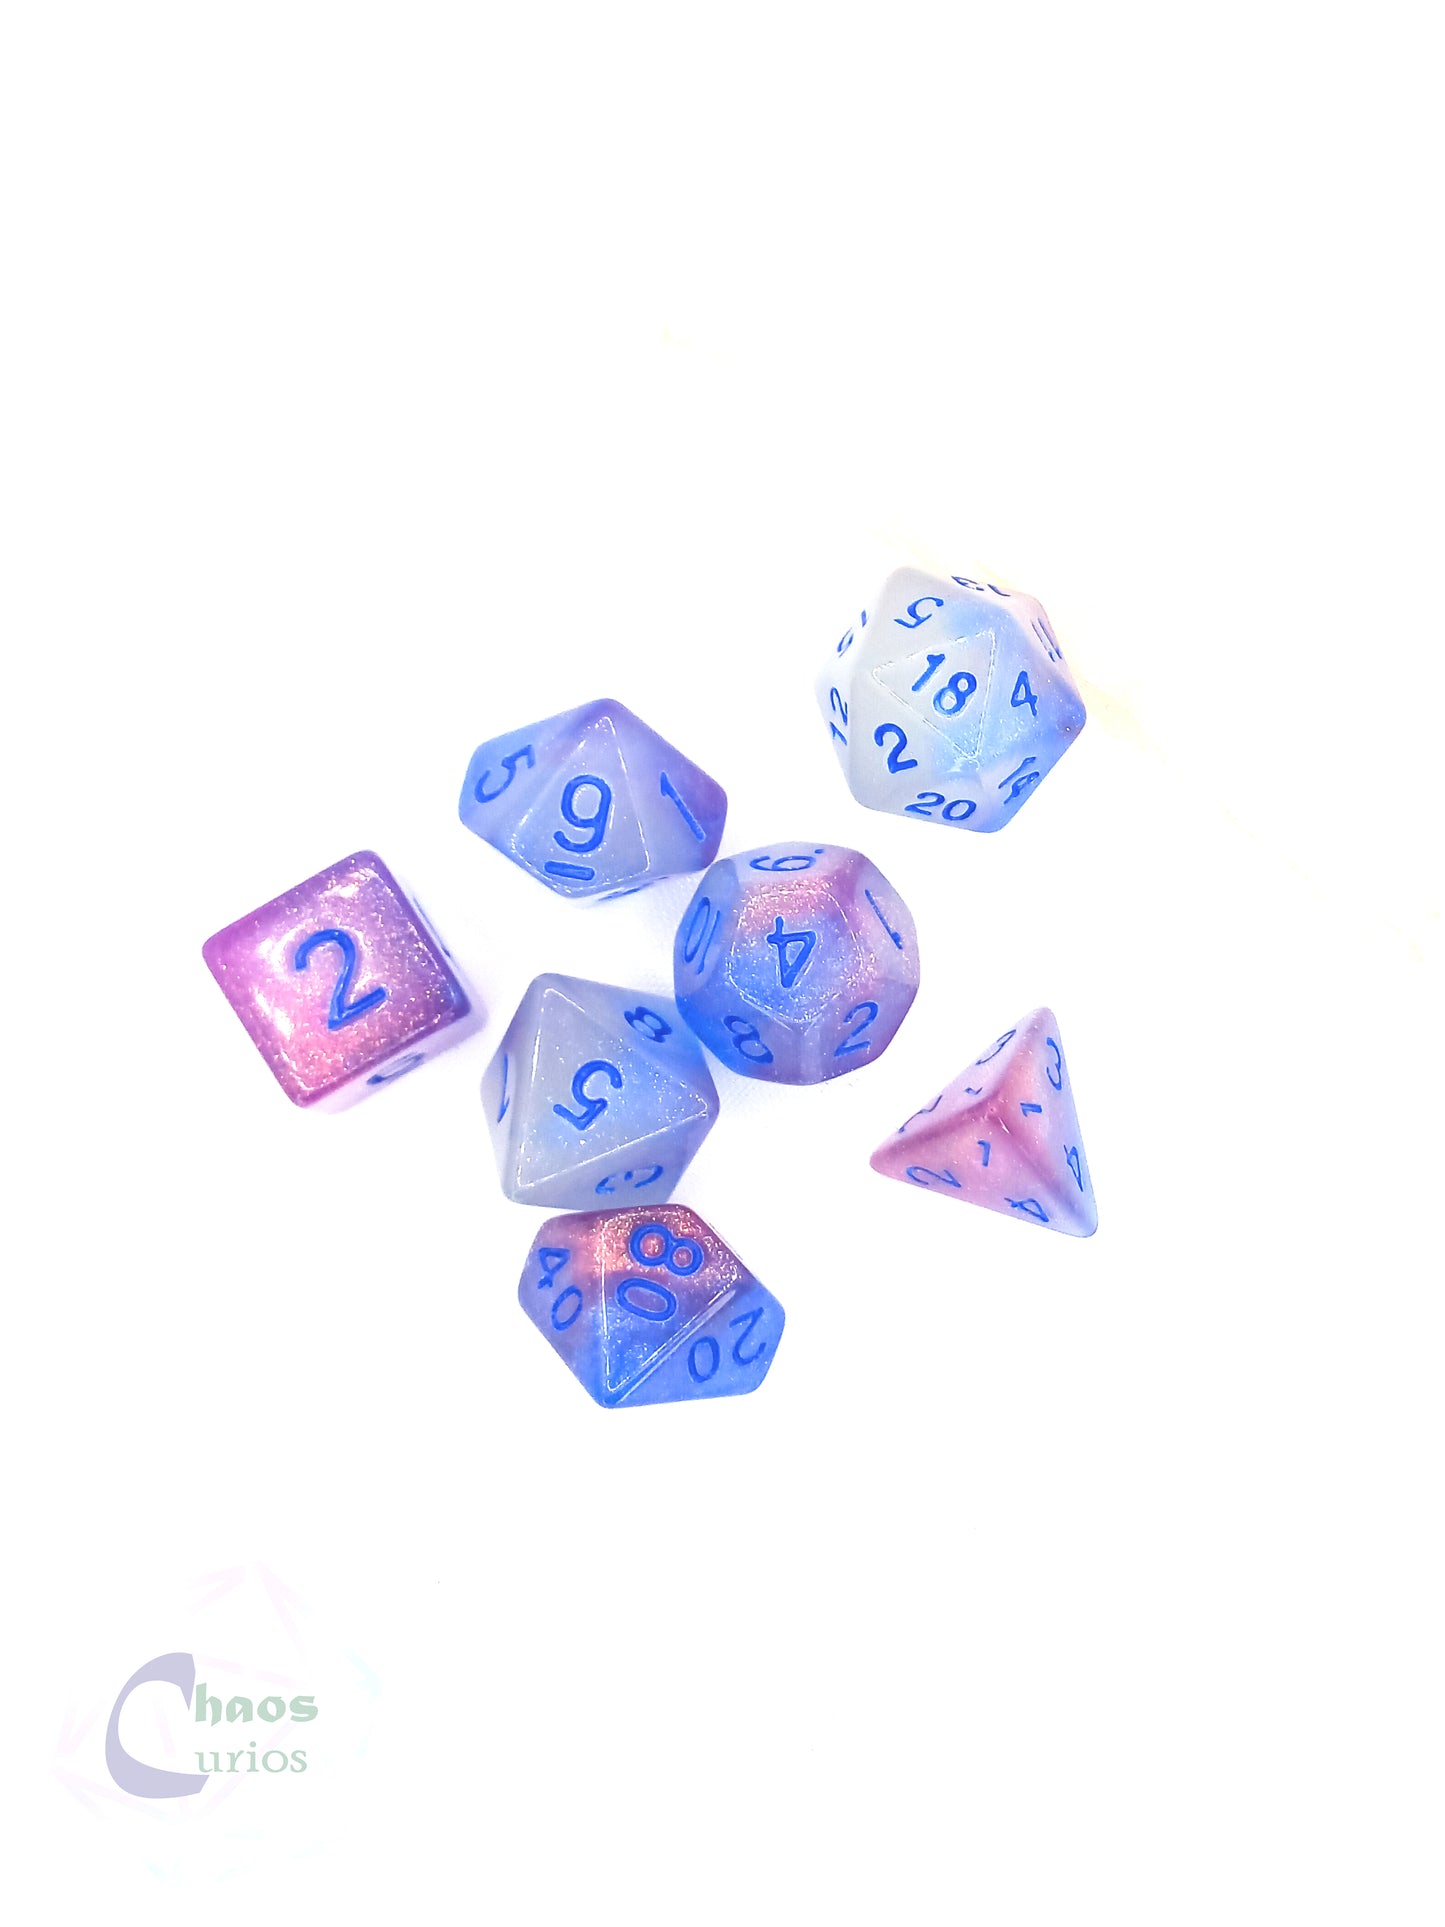 Frosted White Blue 7-piece Dice Set Glow in the Dark